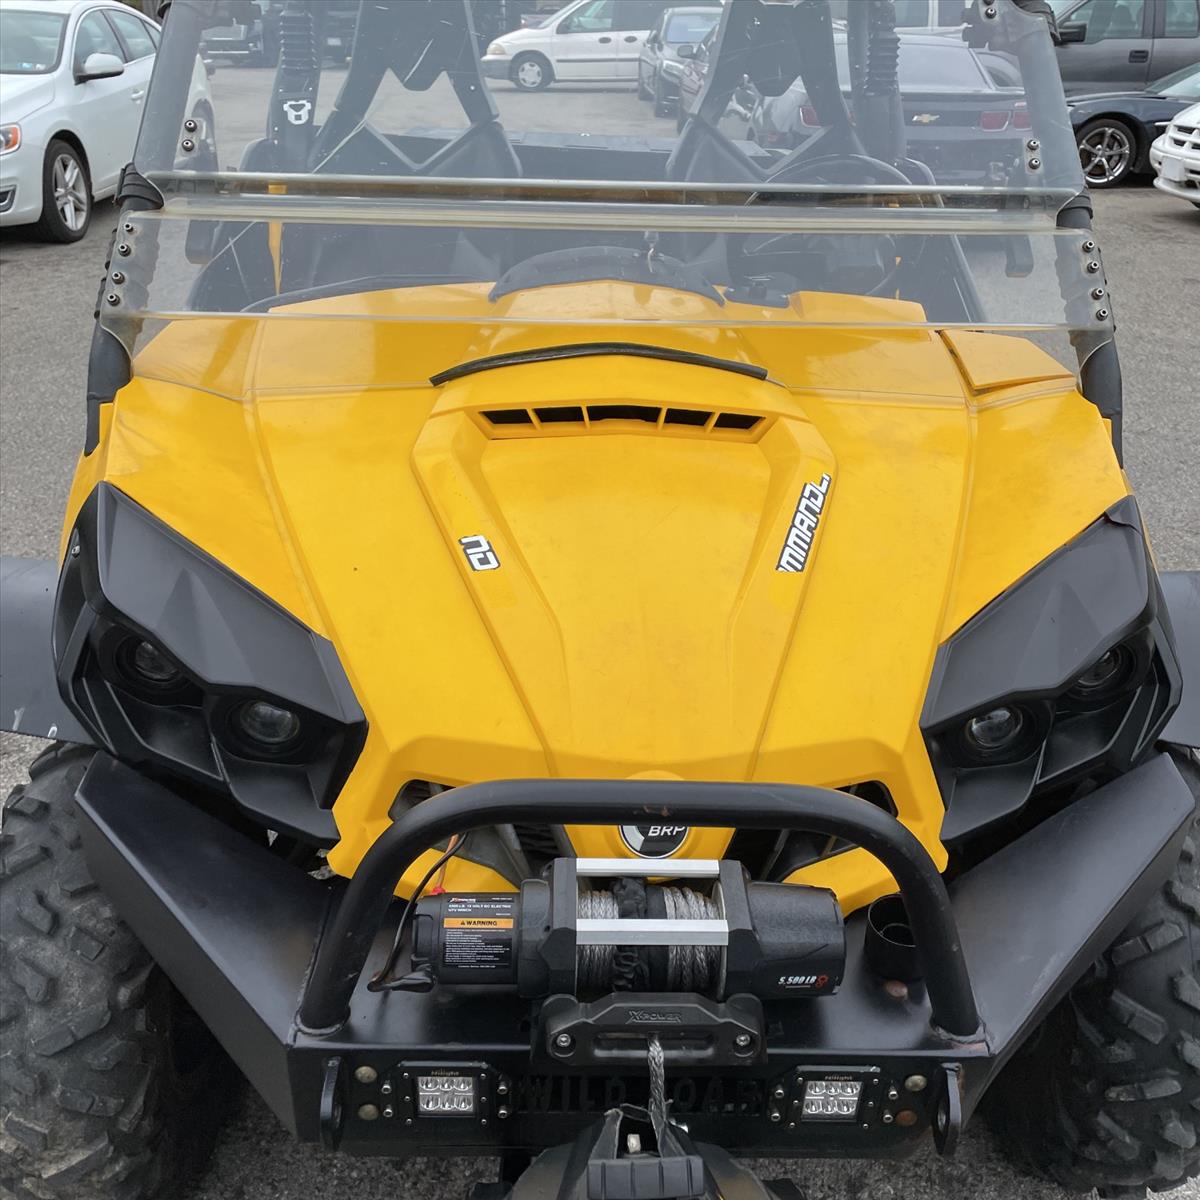 2014 CAN AM Commander 1000 15